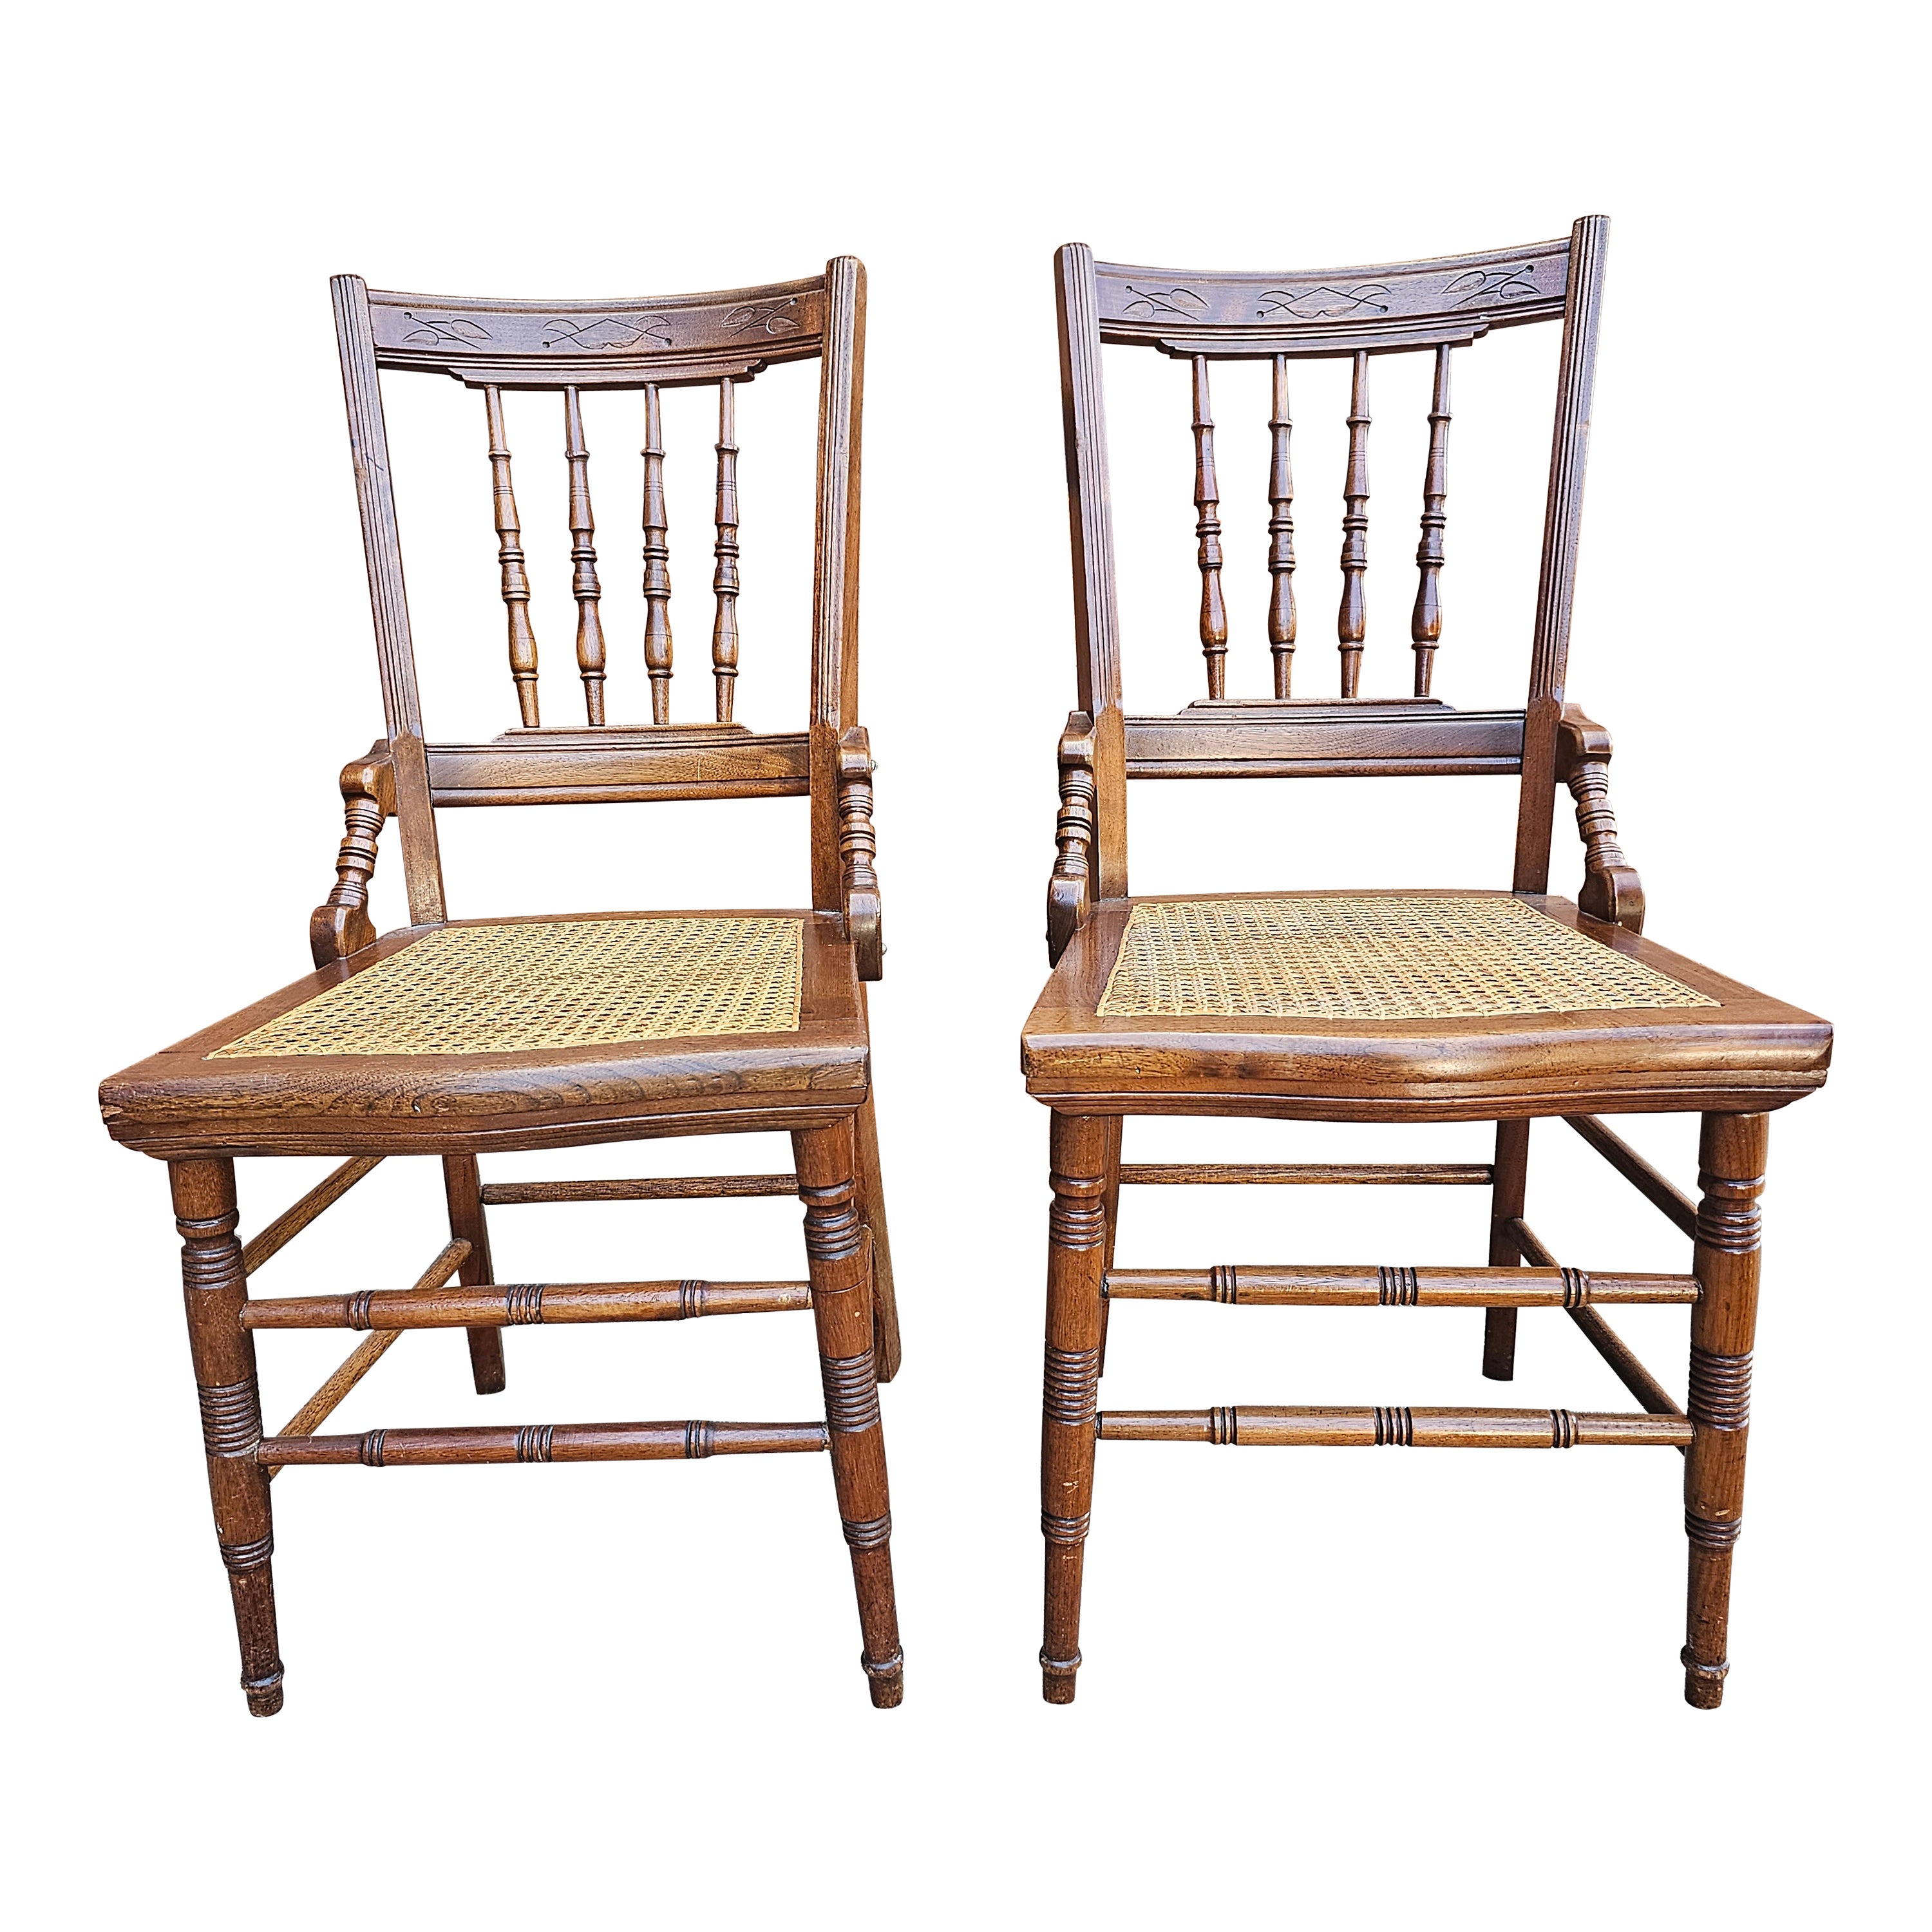 Pair of Victorian Walnut Carved and Spindle Cane Seat Side Chairs